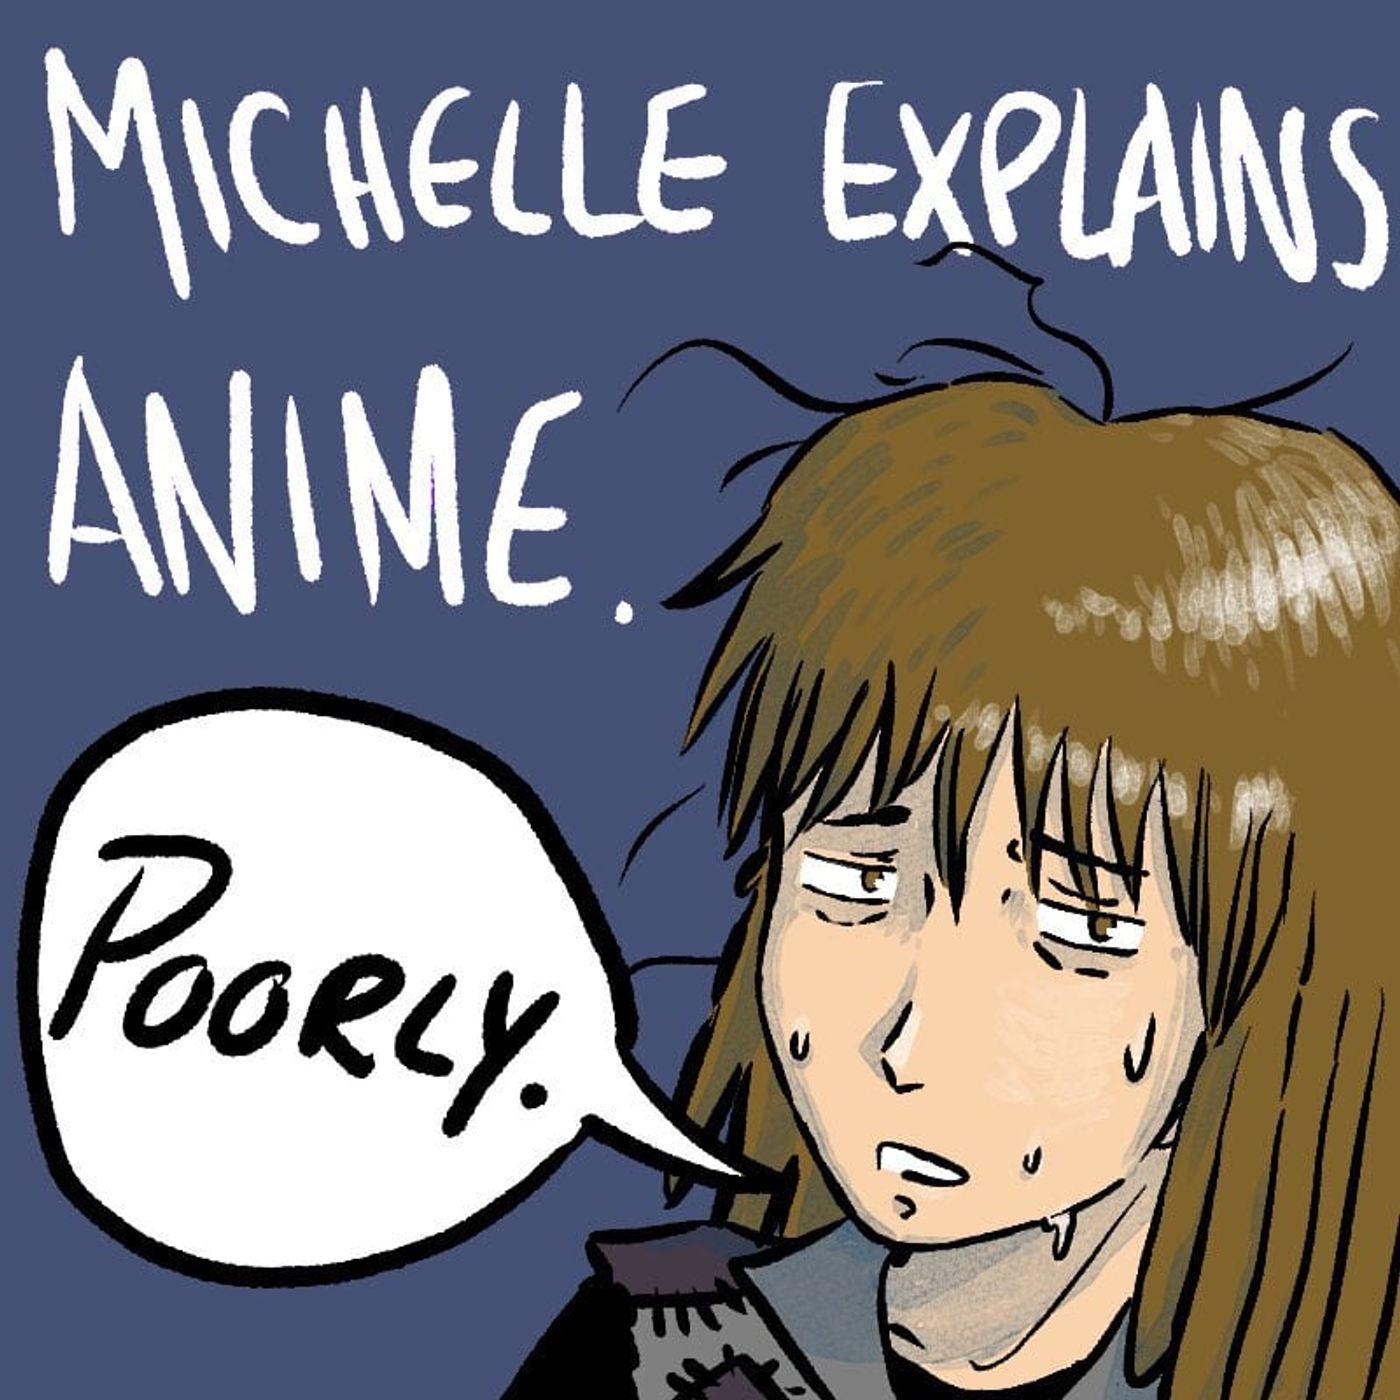 Ep.138 – Michelle Explains Anime, Poorly - A New Podcast!